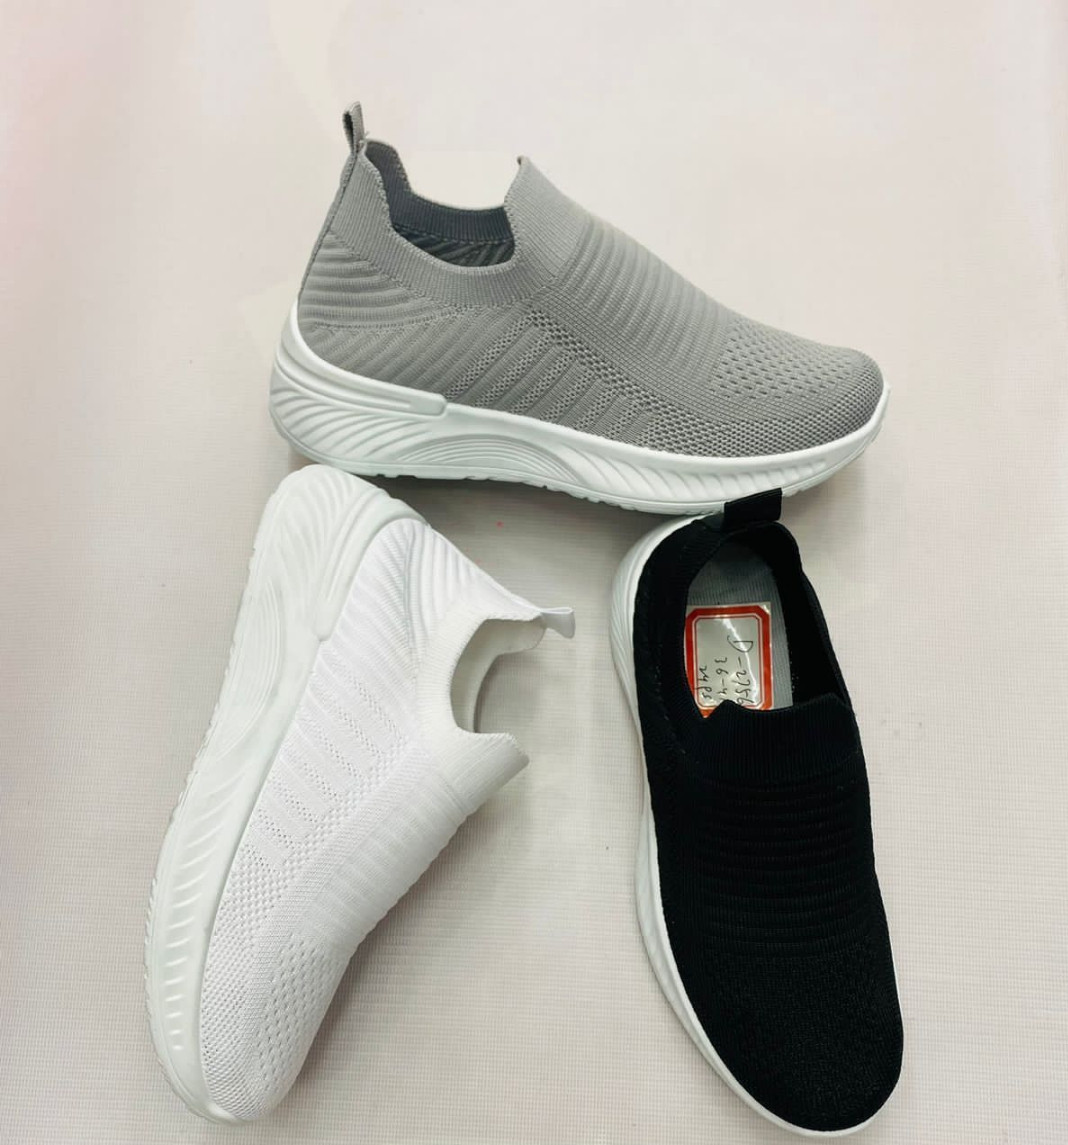 High-end breathable sponge cake Slip-On Shoes For Women and Girls Premium quality Fashion shoes Women Grey - White - Black (24 pairs in one BOX) Size 36 to 41